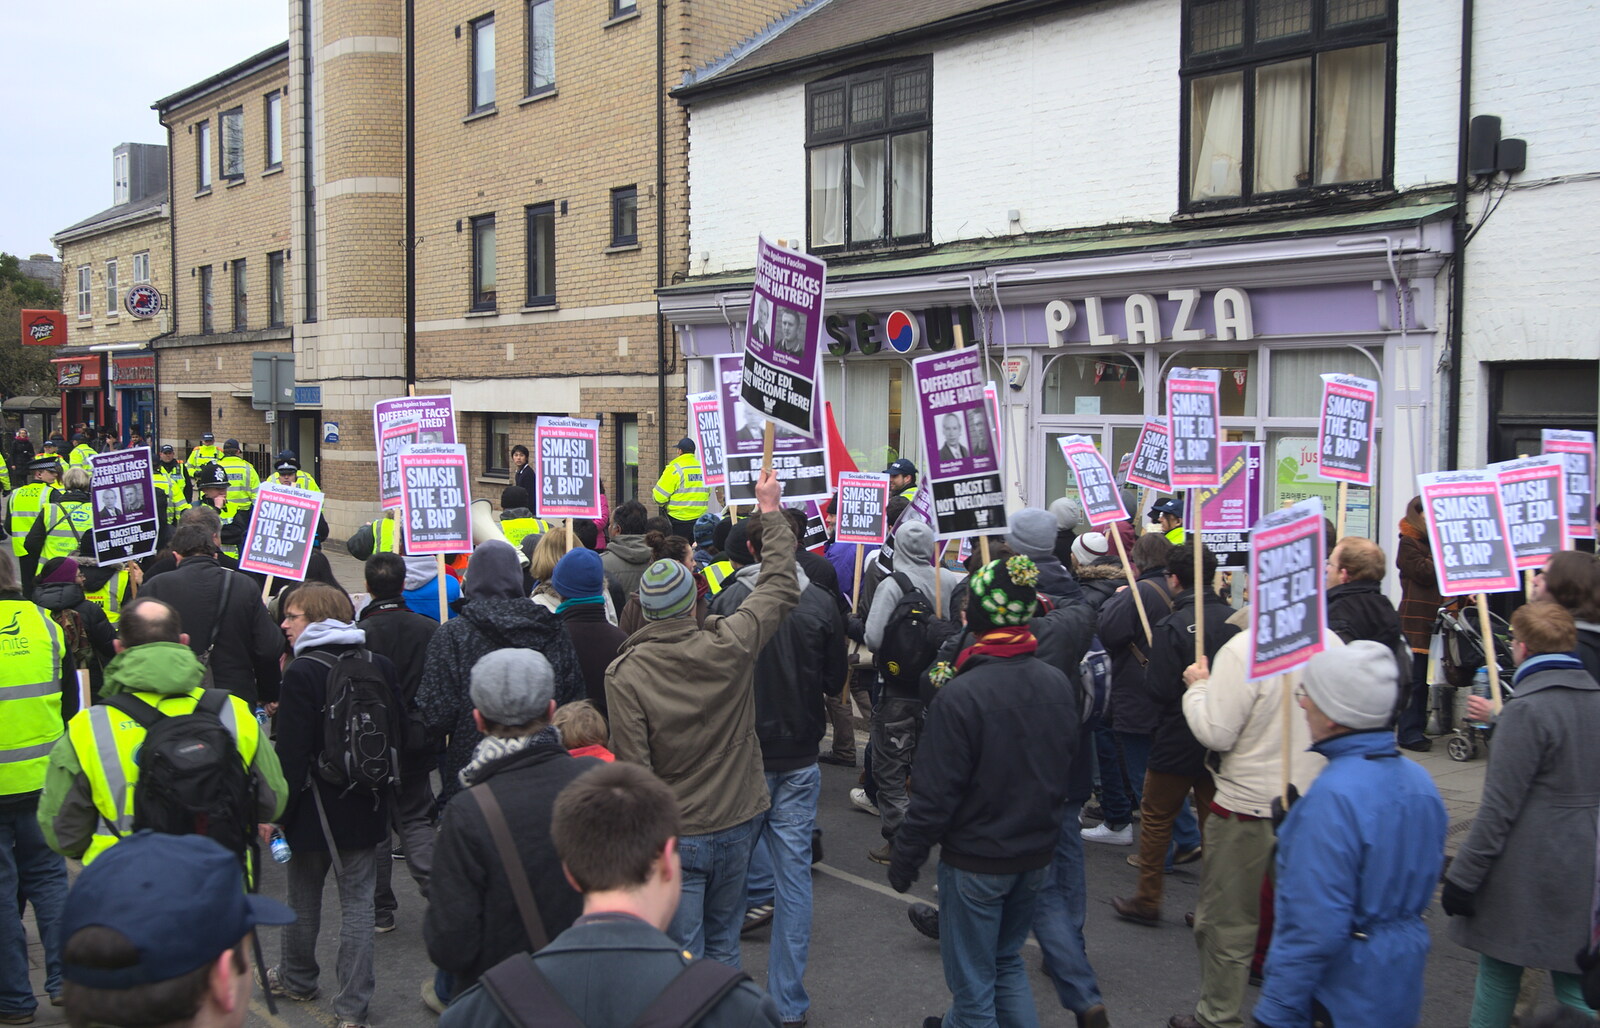 Passing Seoul Plaza from An Anti-Fascist March, Mill Road, Cambridge - 23rd February 2013